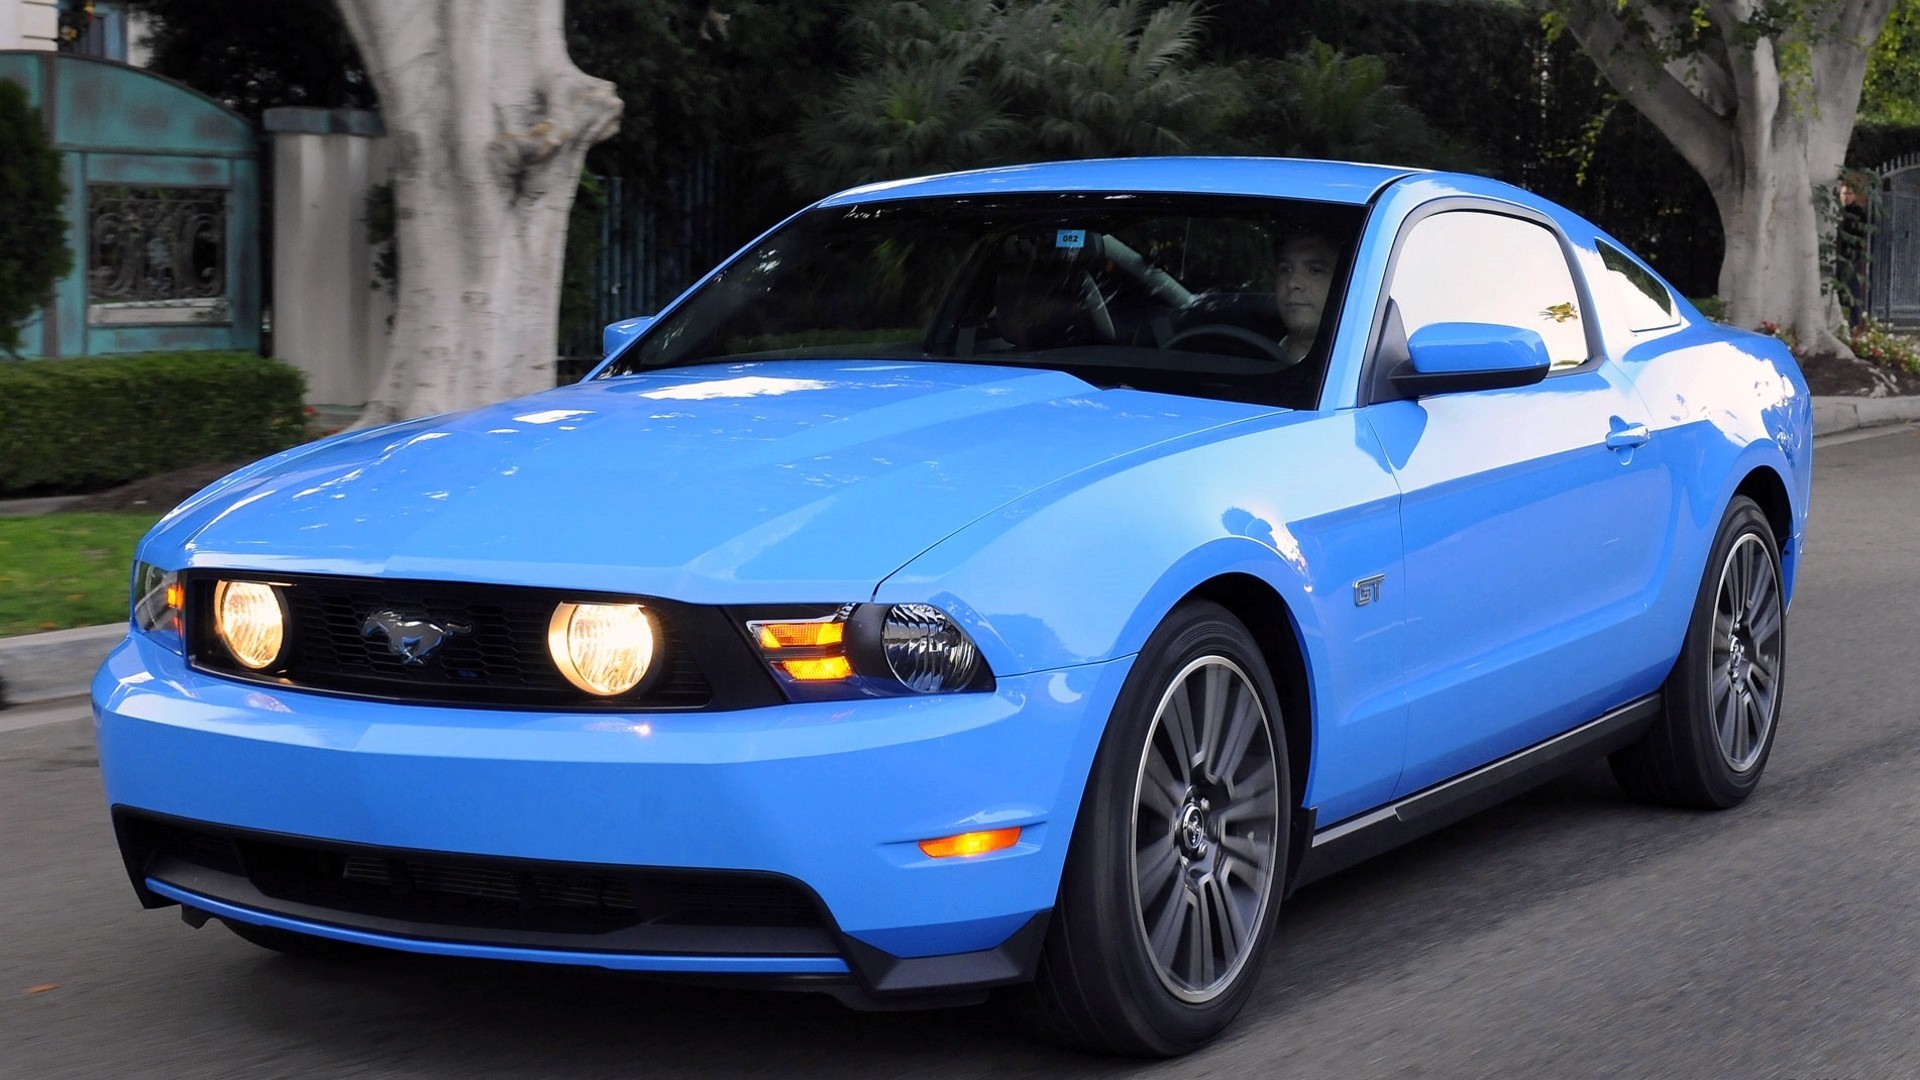 Ford Mustang, Muscle Cars, Blue Cars Wallpaper